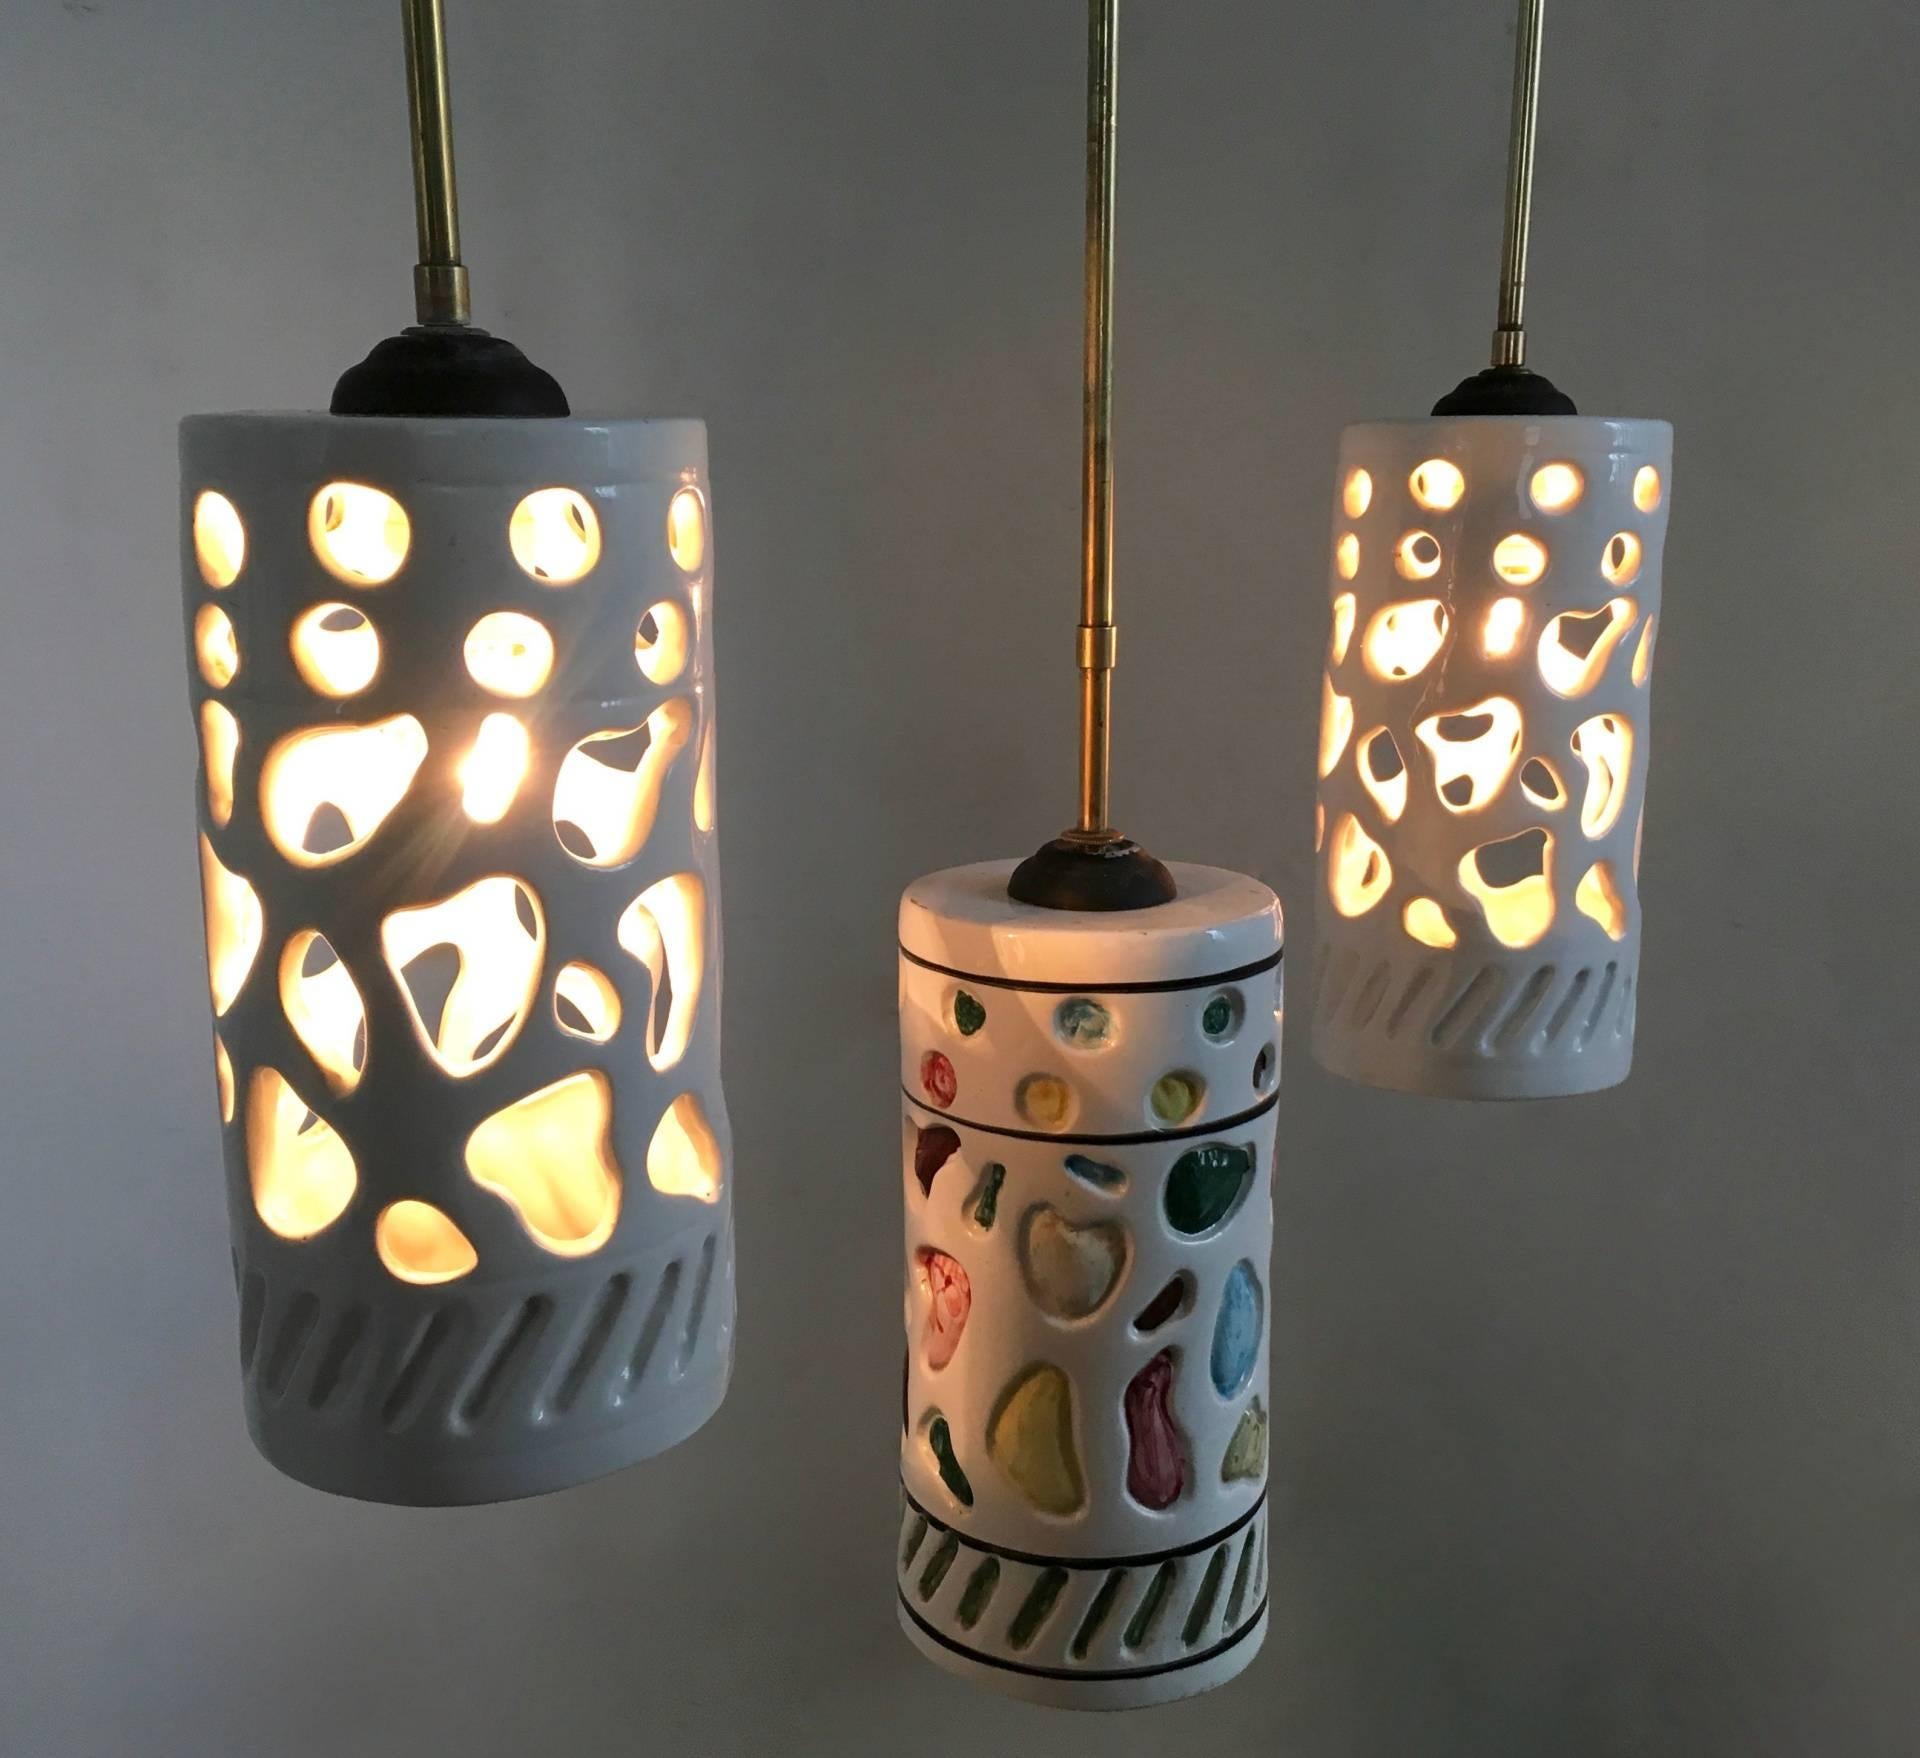 Vintage Chandelier with Cylindrical Ceramic Lampshades by Ceramiche Pucci, Italy In Excellent Condition For Sale In Bresso, Lombardy